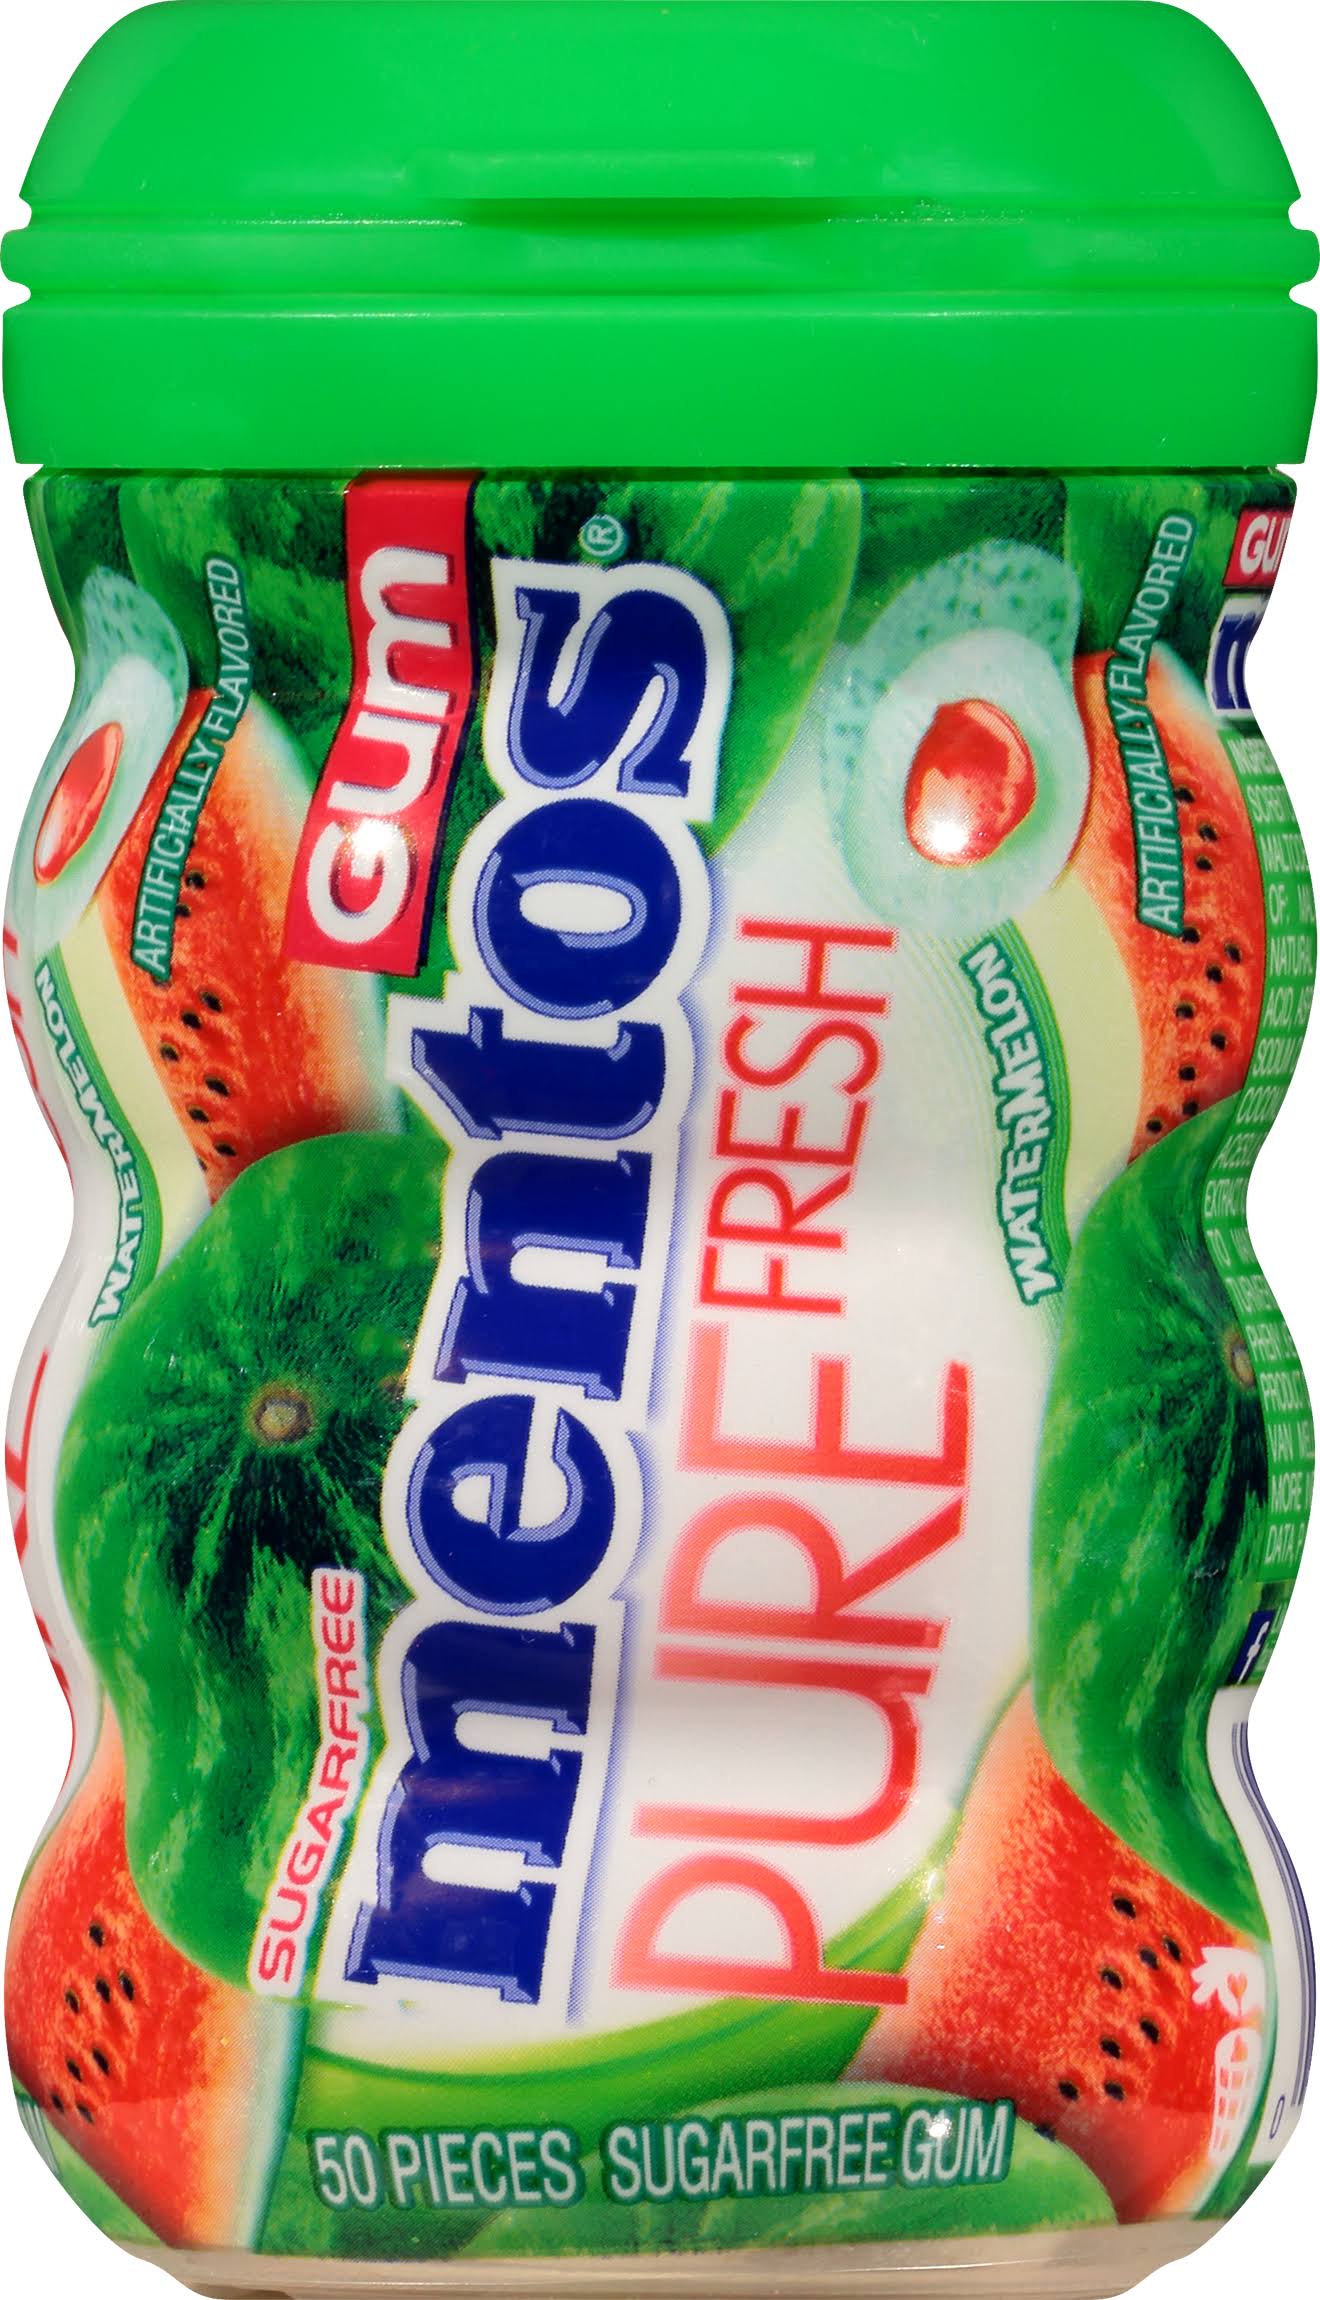 Mentos Pure Fresh Sugar Free Chewing Gum - with Xylitol, Watermelon, 50ct